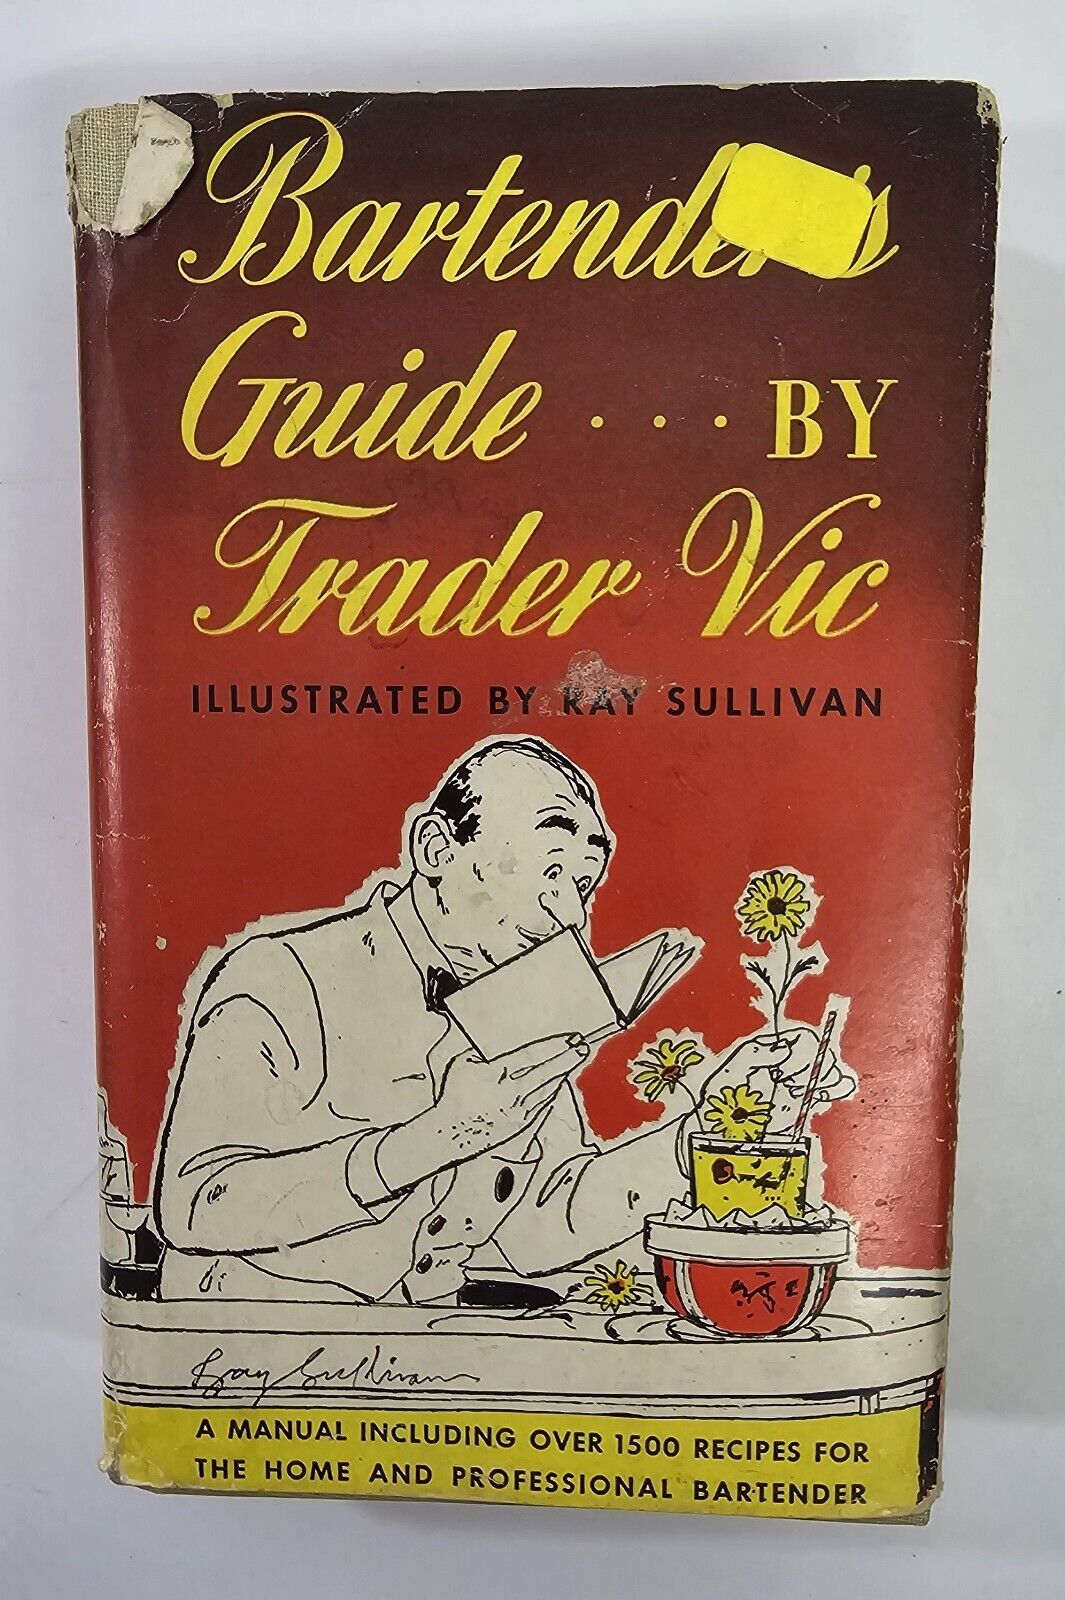 Bartender\'s Guide by TRADER VIC Cocktail Recipes Vintage 1948 Reprint Hardcover